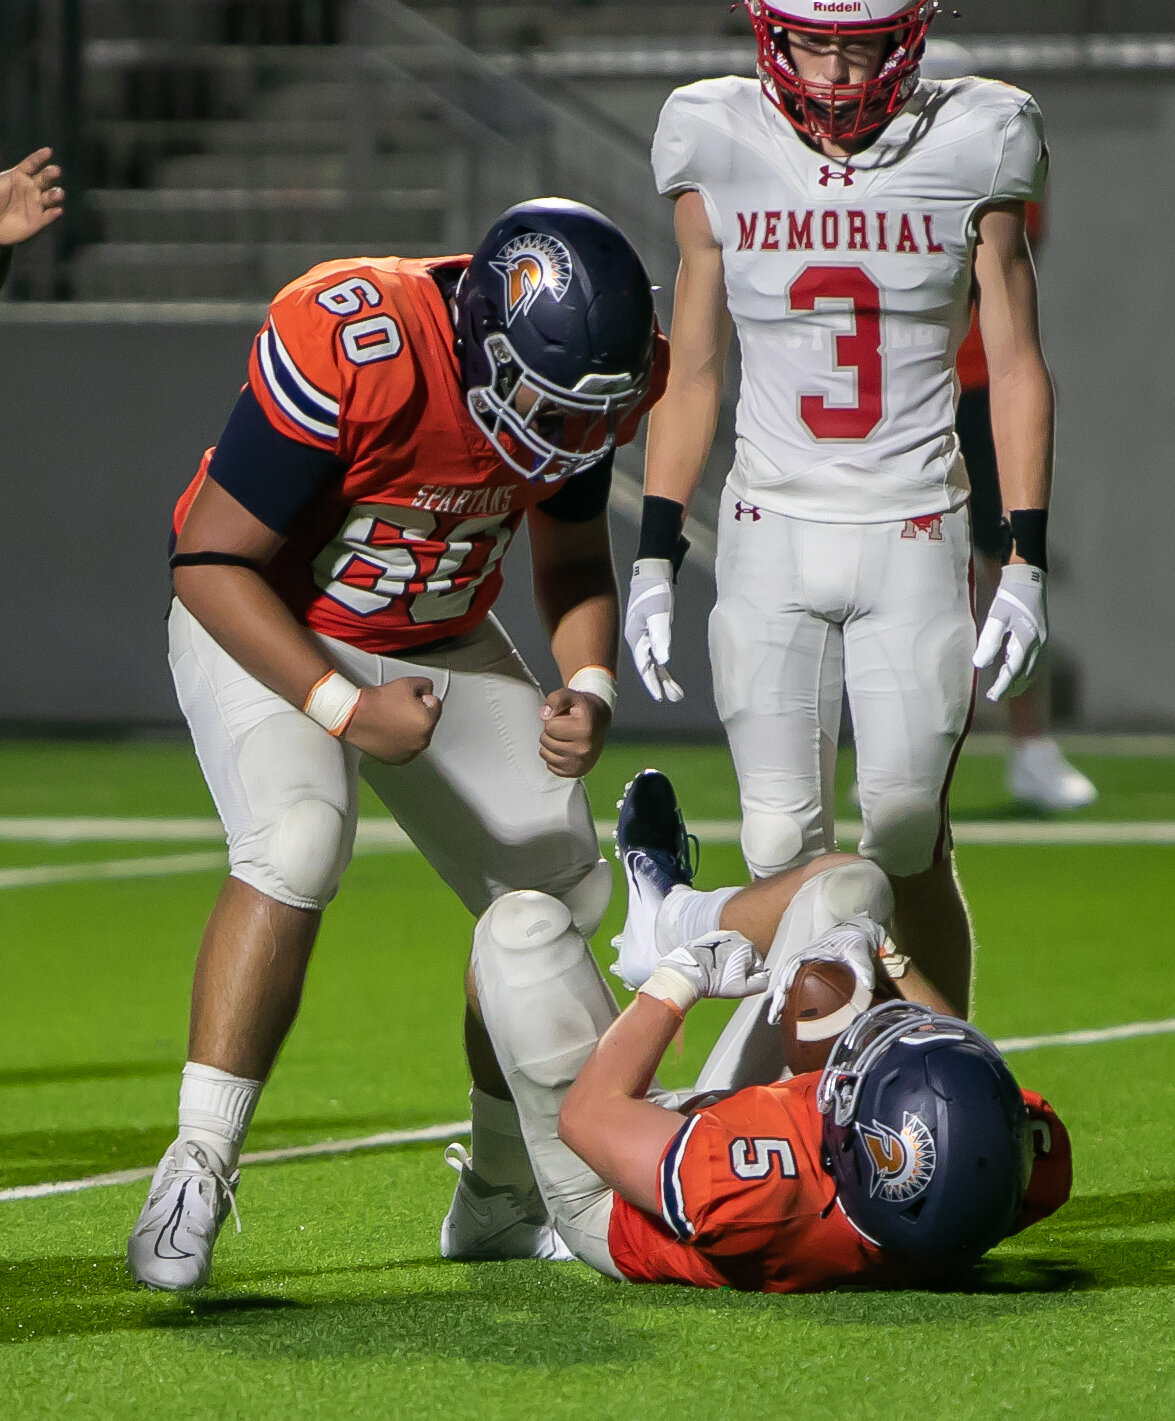 Barrett Hudson and Jason Manrique celebrate after Hudson scored a touchdown during Thursday's game between Seven Lakes and Memorial at Legacy Stadium.